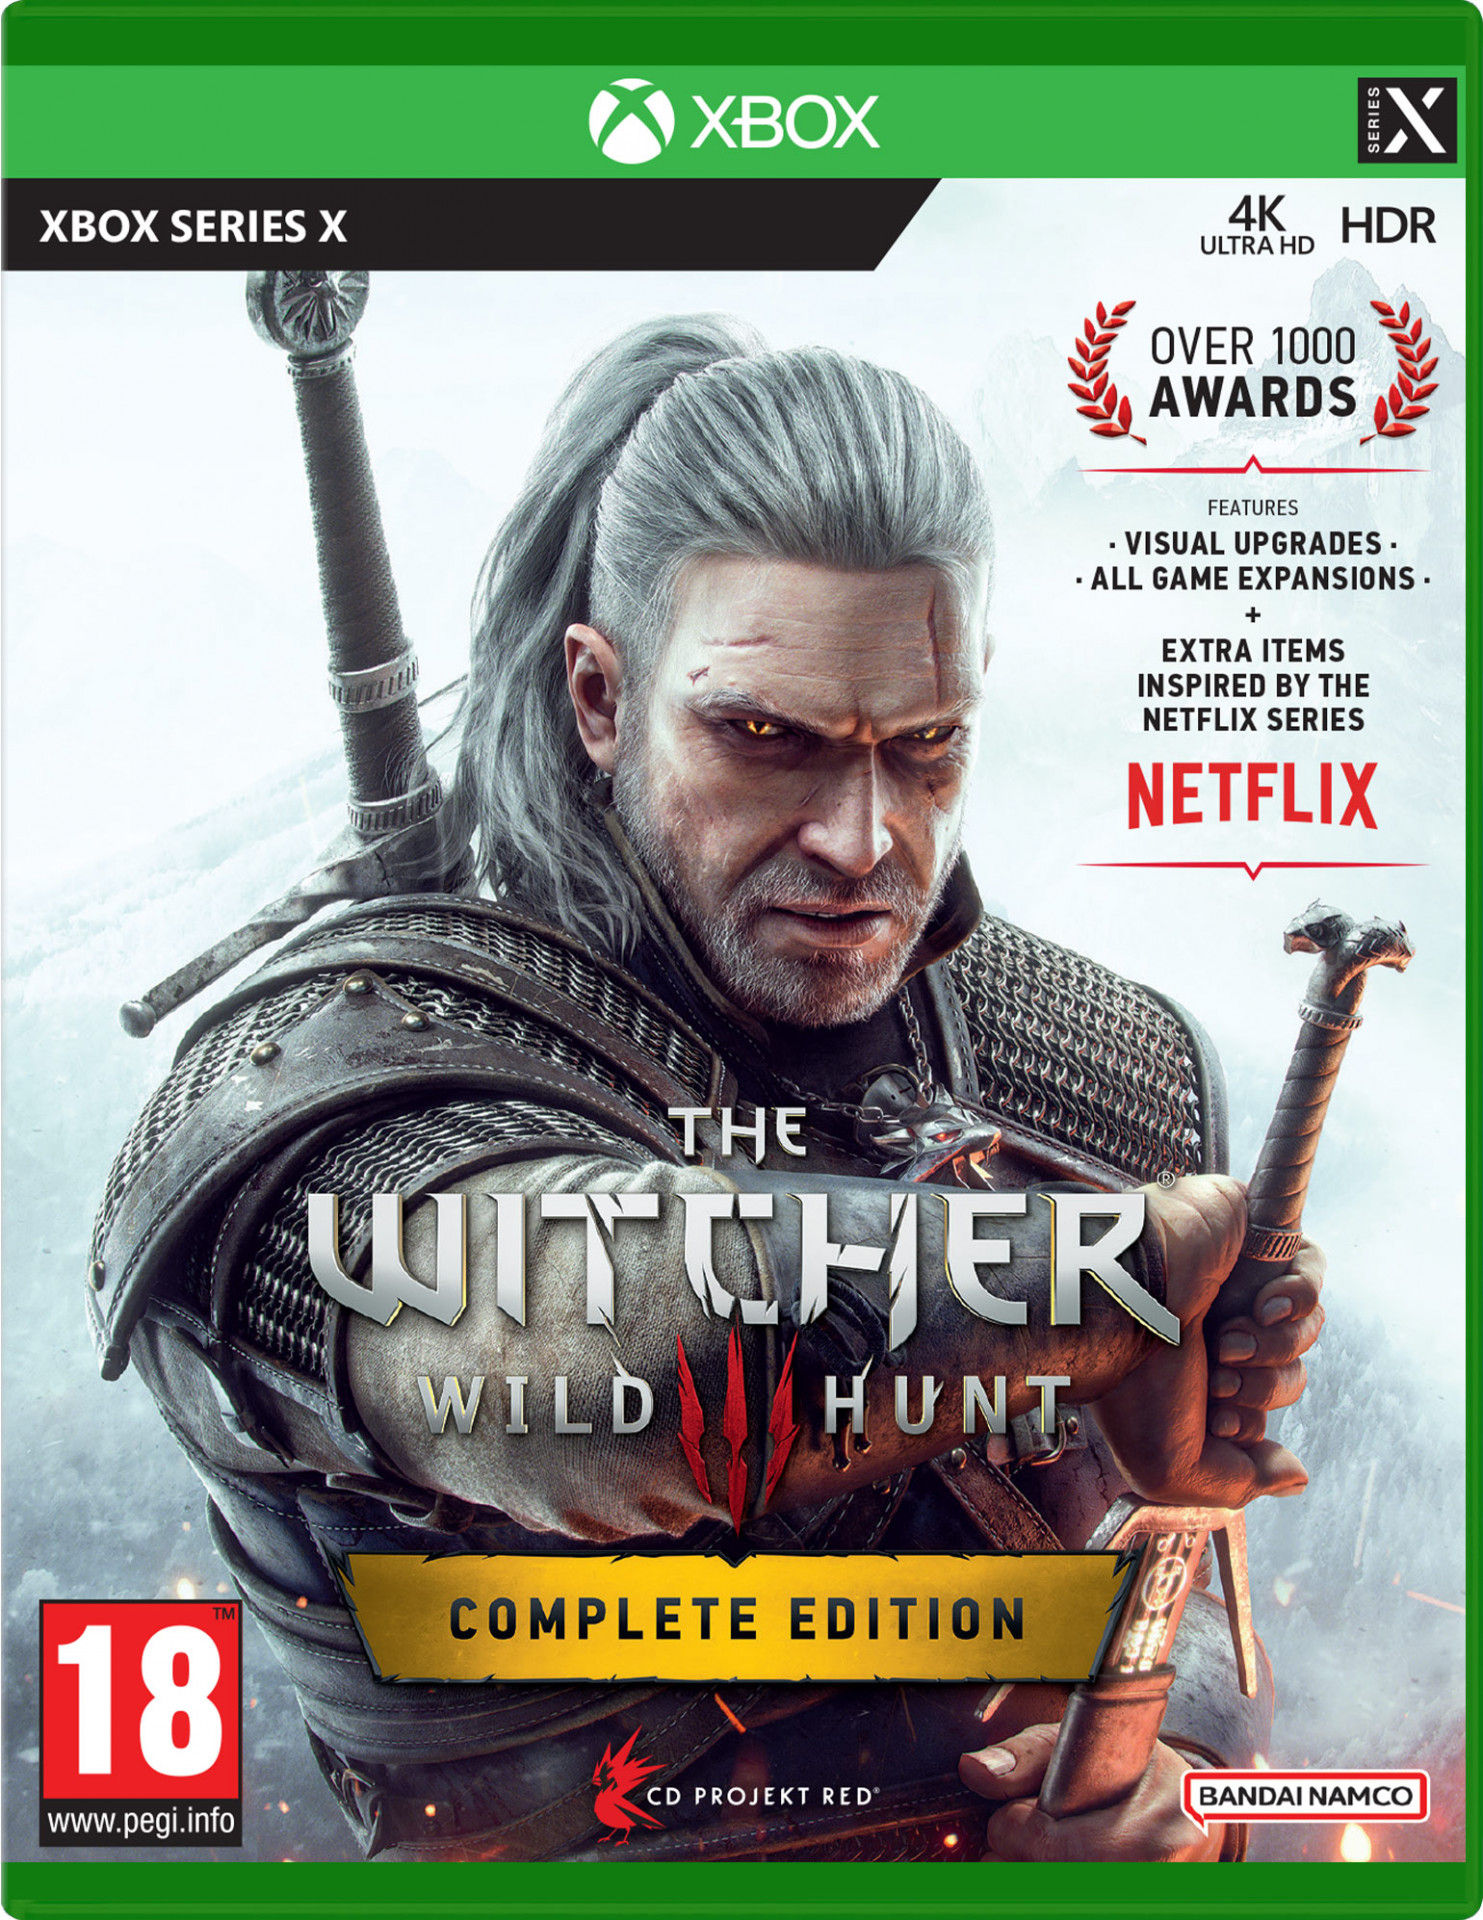 The Witcher 3 Wild Hunt Complete Edition Xbox Series X